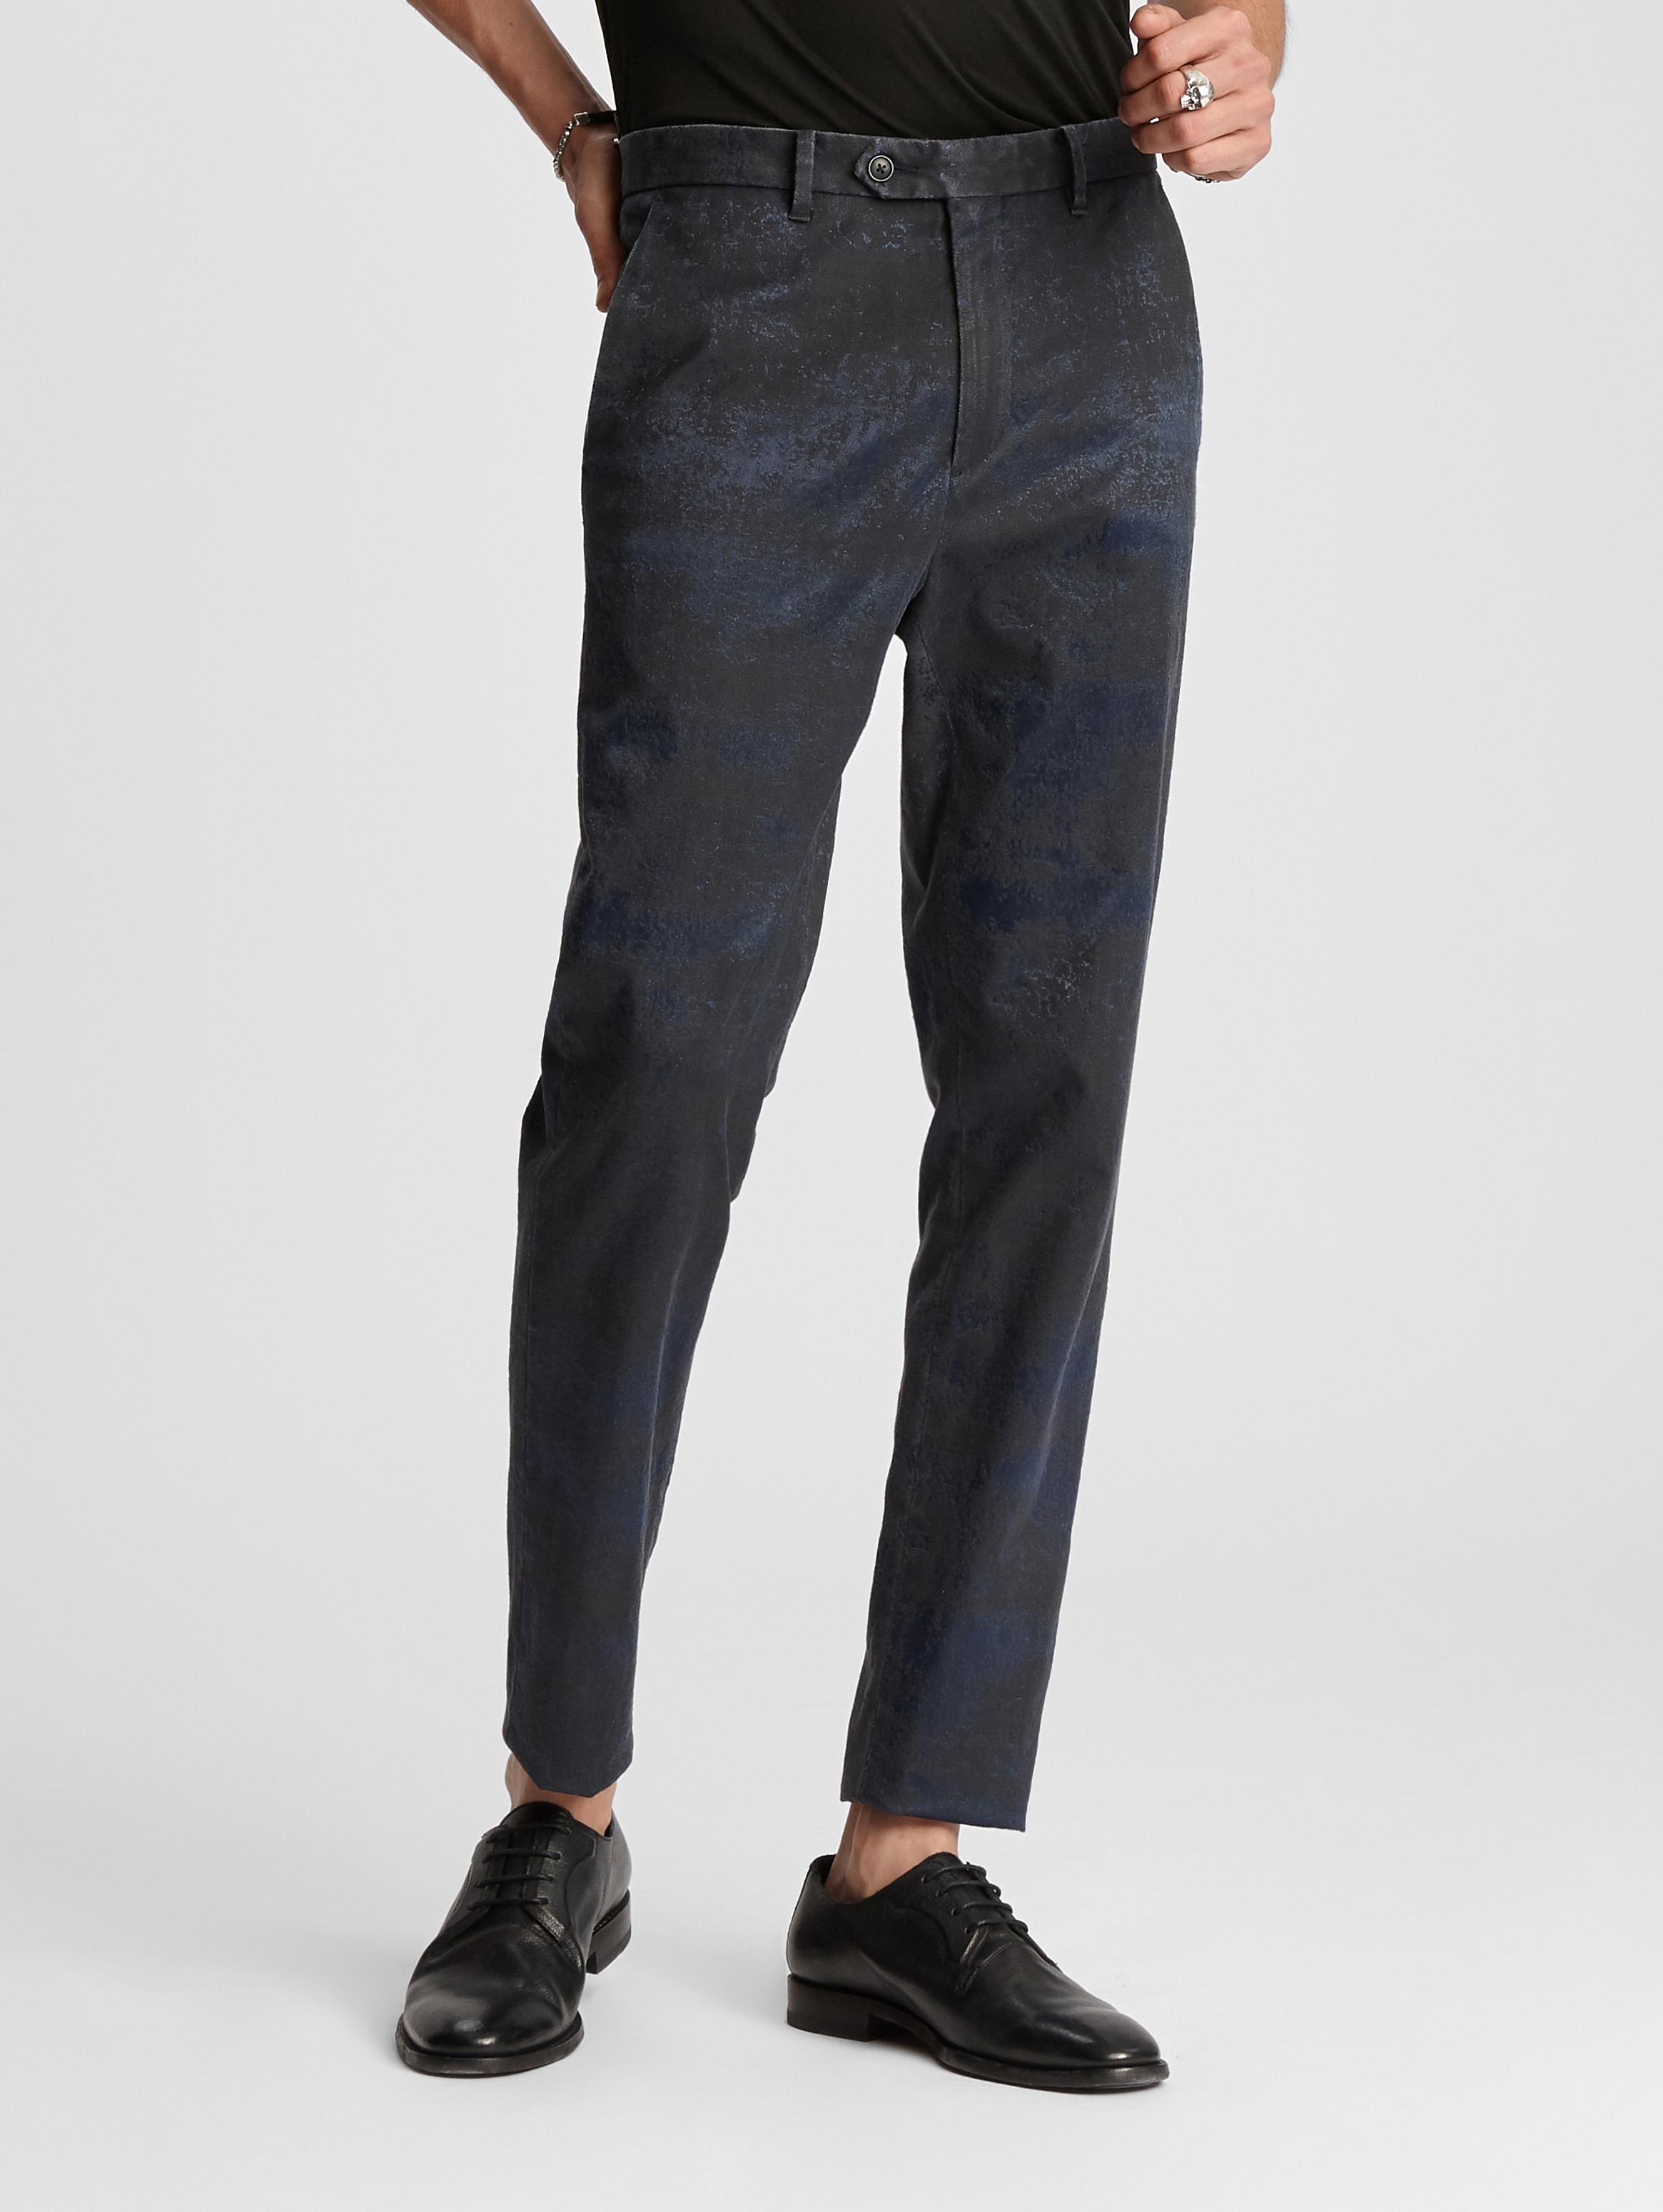 ABSTRACT JACQUARD ESSEX PANT image number 1